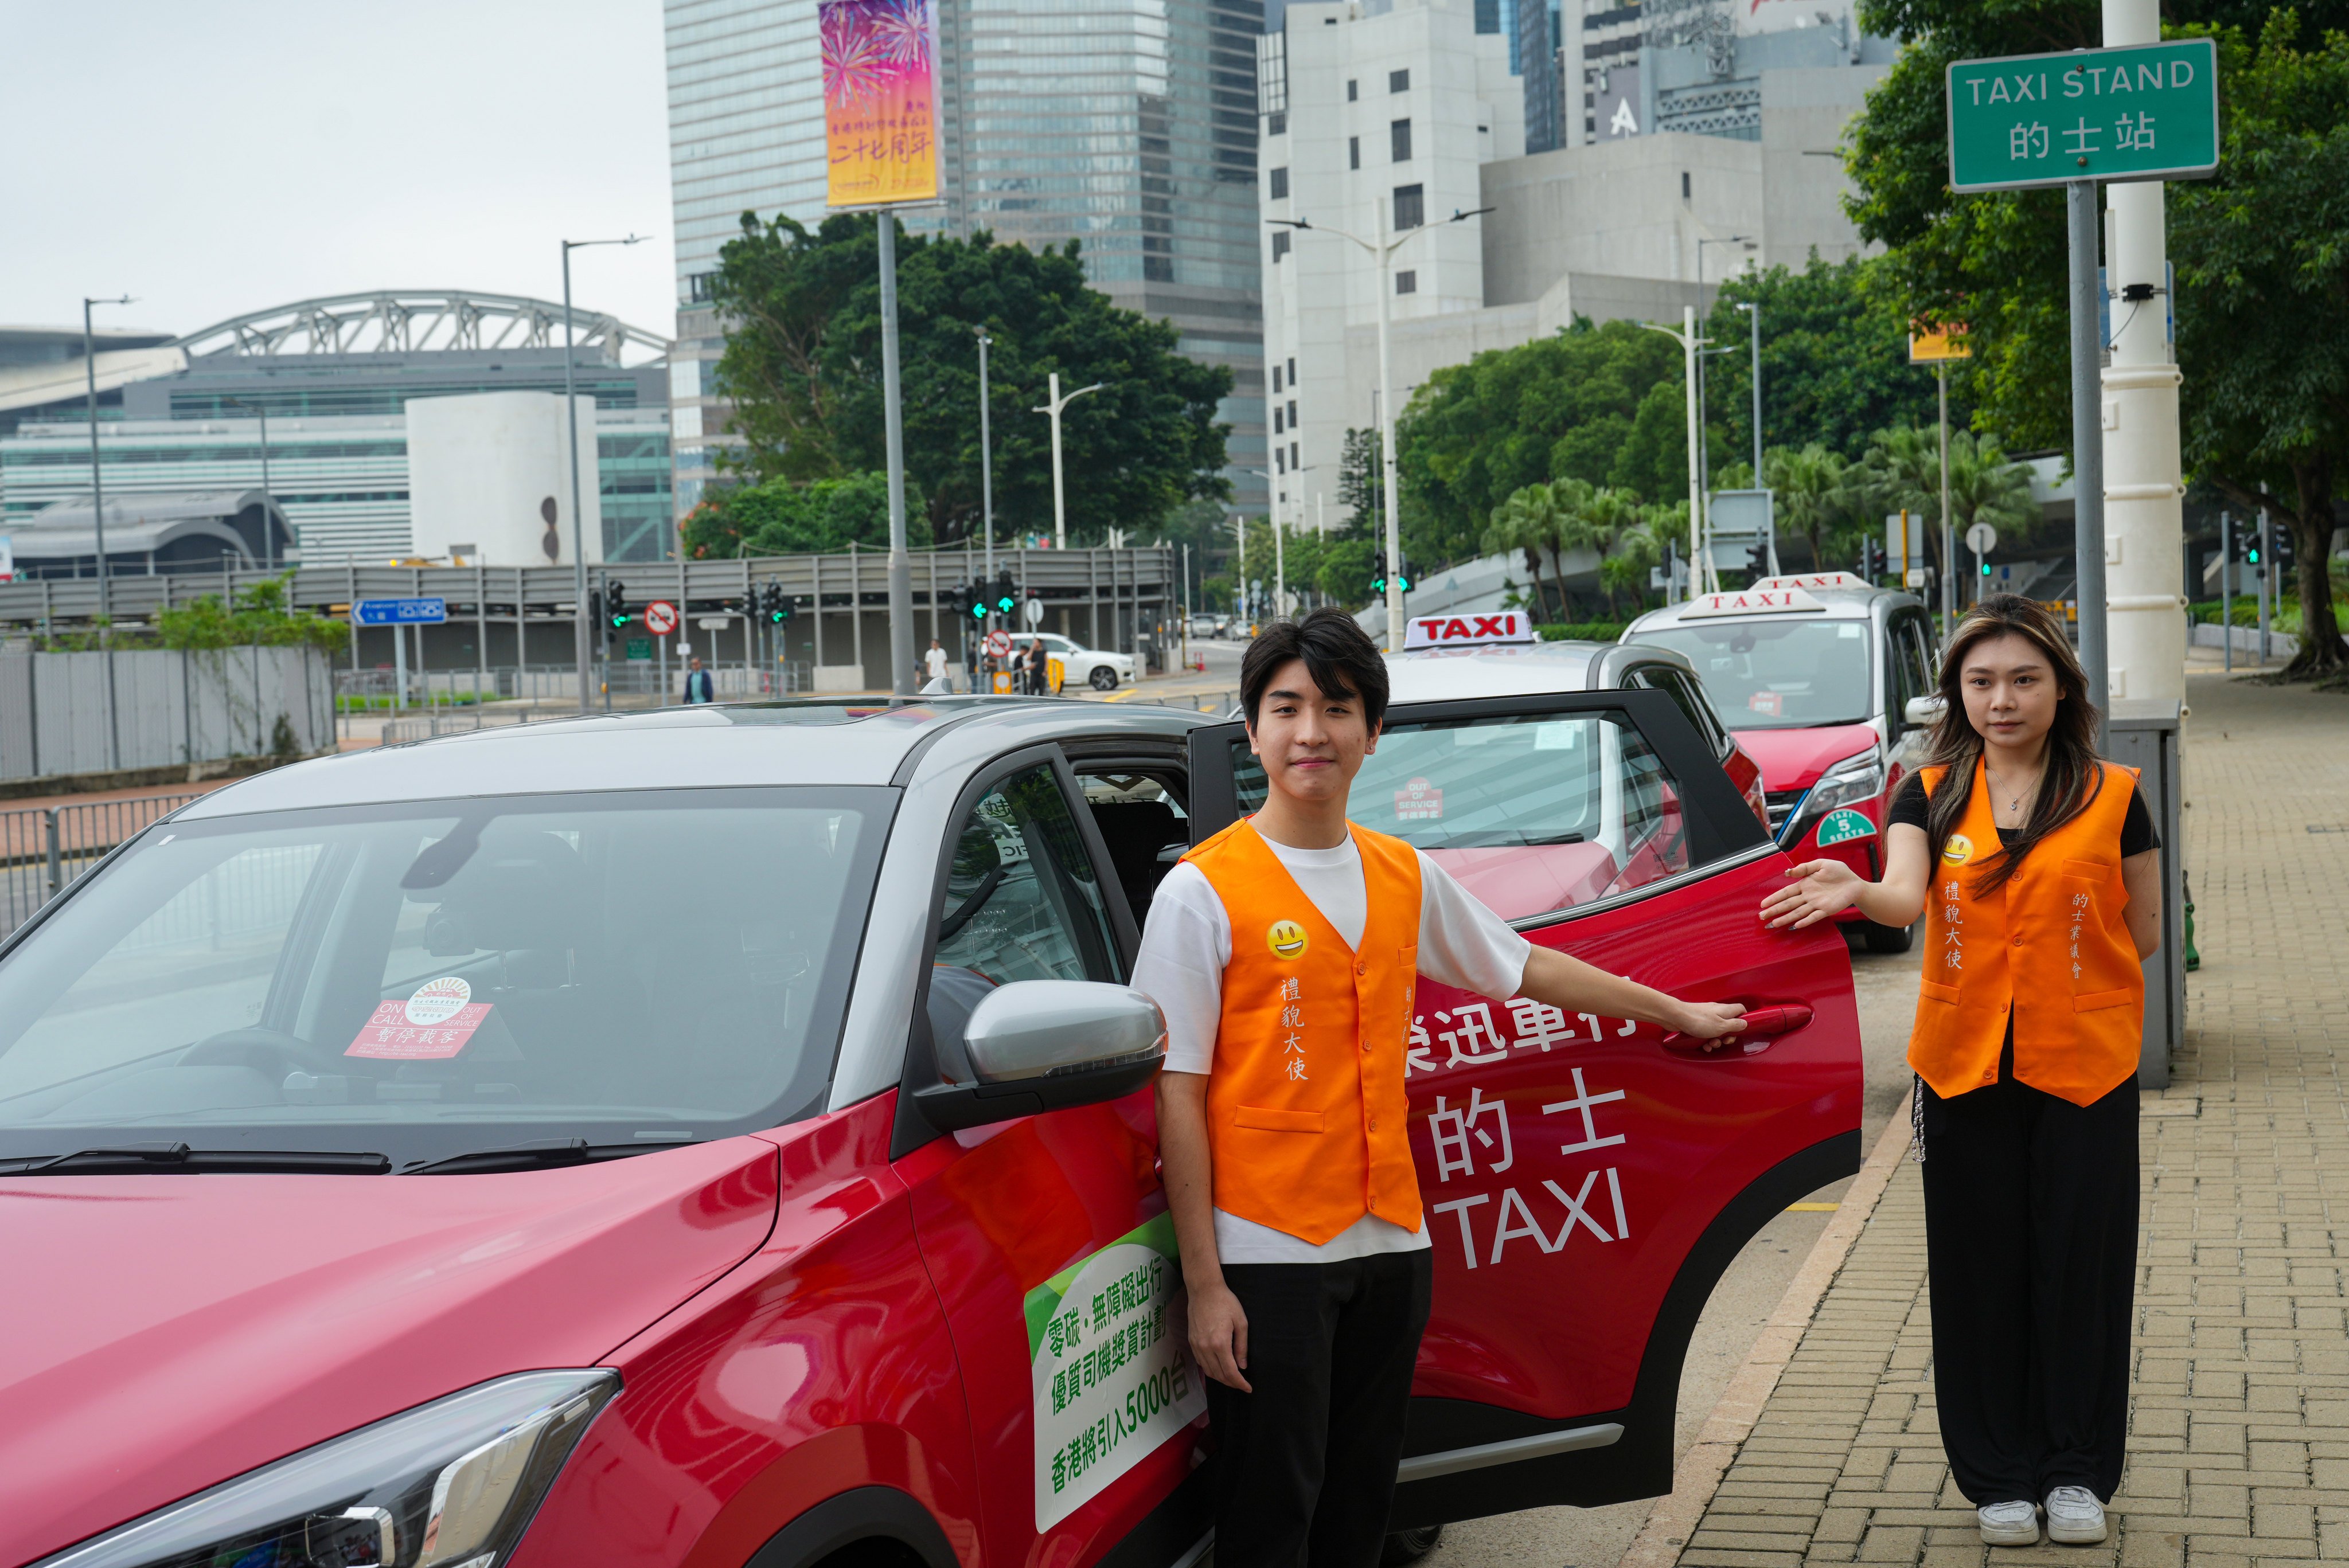 The taxi industry is employing ambassadors at some cab ranks as part of a new courtesy drive. Photo: Sam Tsang